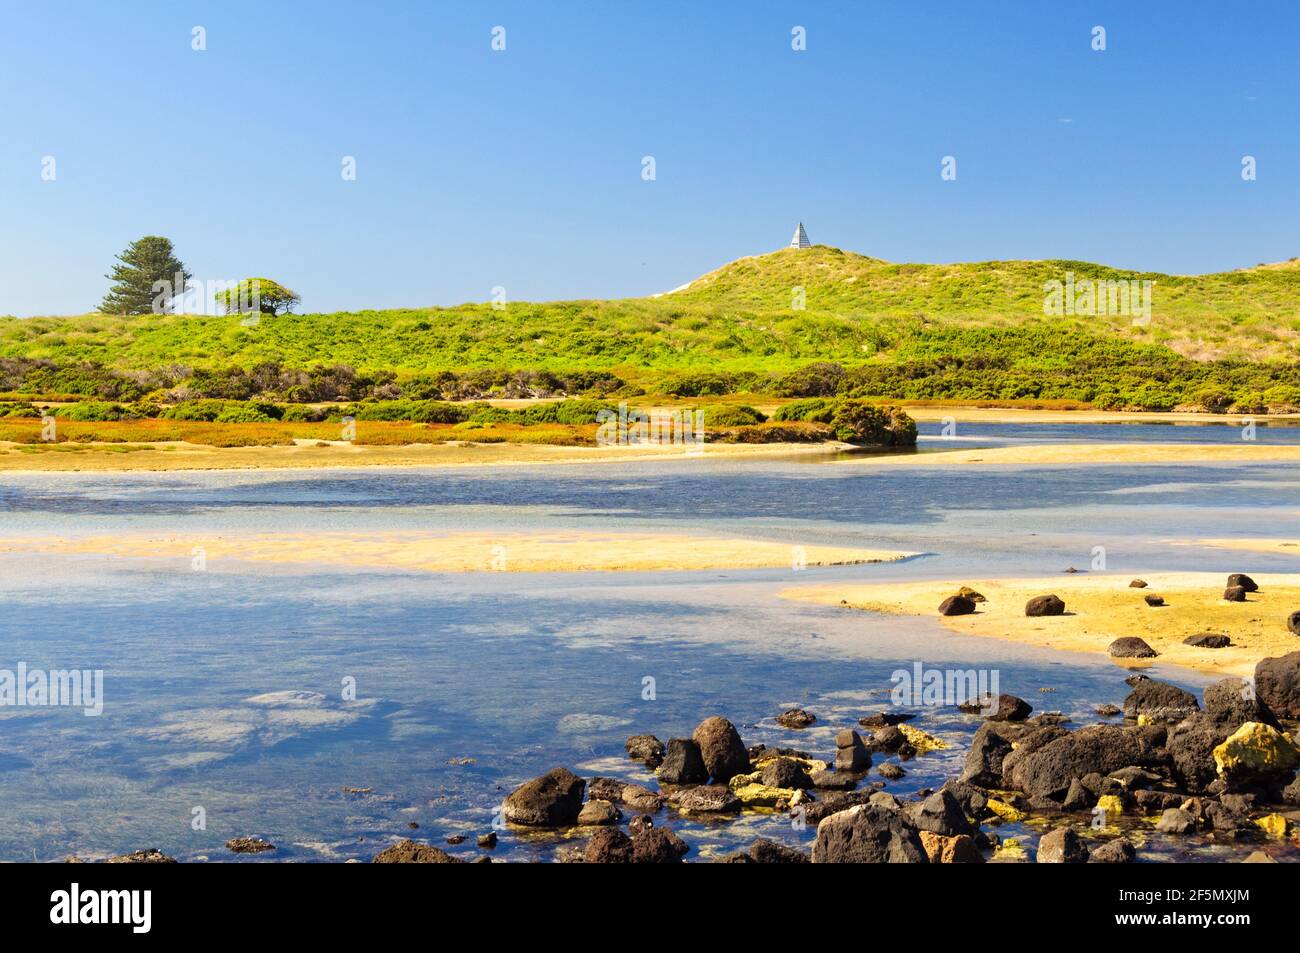 Griffiths Island Reserve lies at the mouth of the Moyne River - Port Fairy, Victoria, Australia Stock Photo